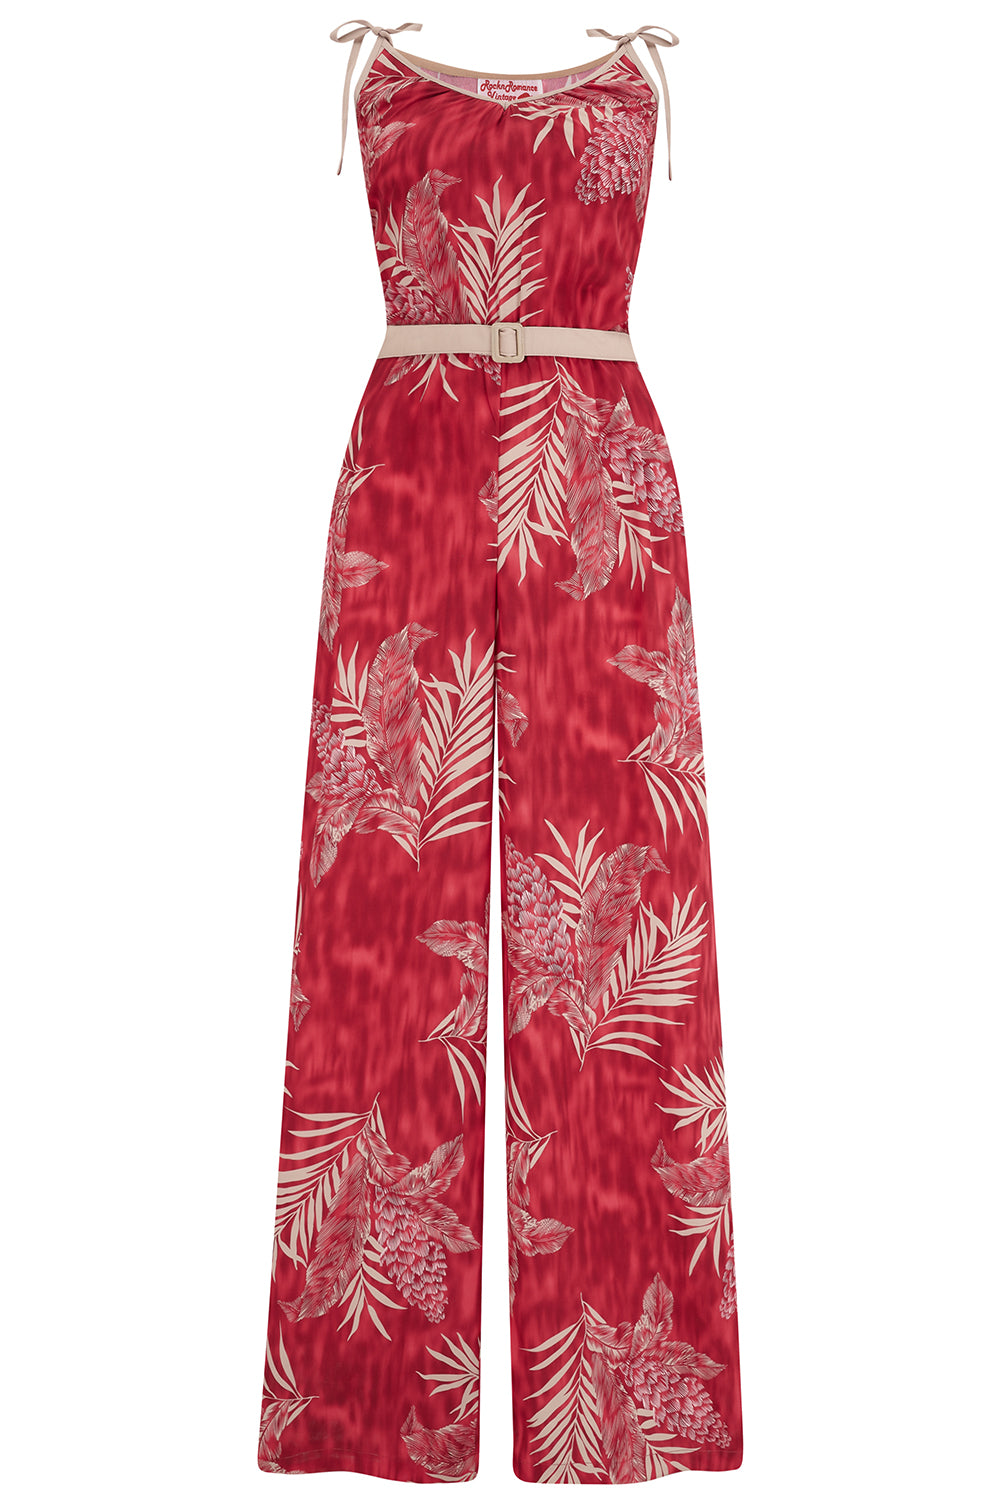 **Sample Sale** The "Marcie" Jump Suit in Ruby Palm Print, True & Authentic 1950s Vintage Style